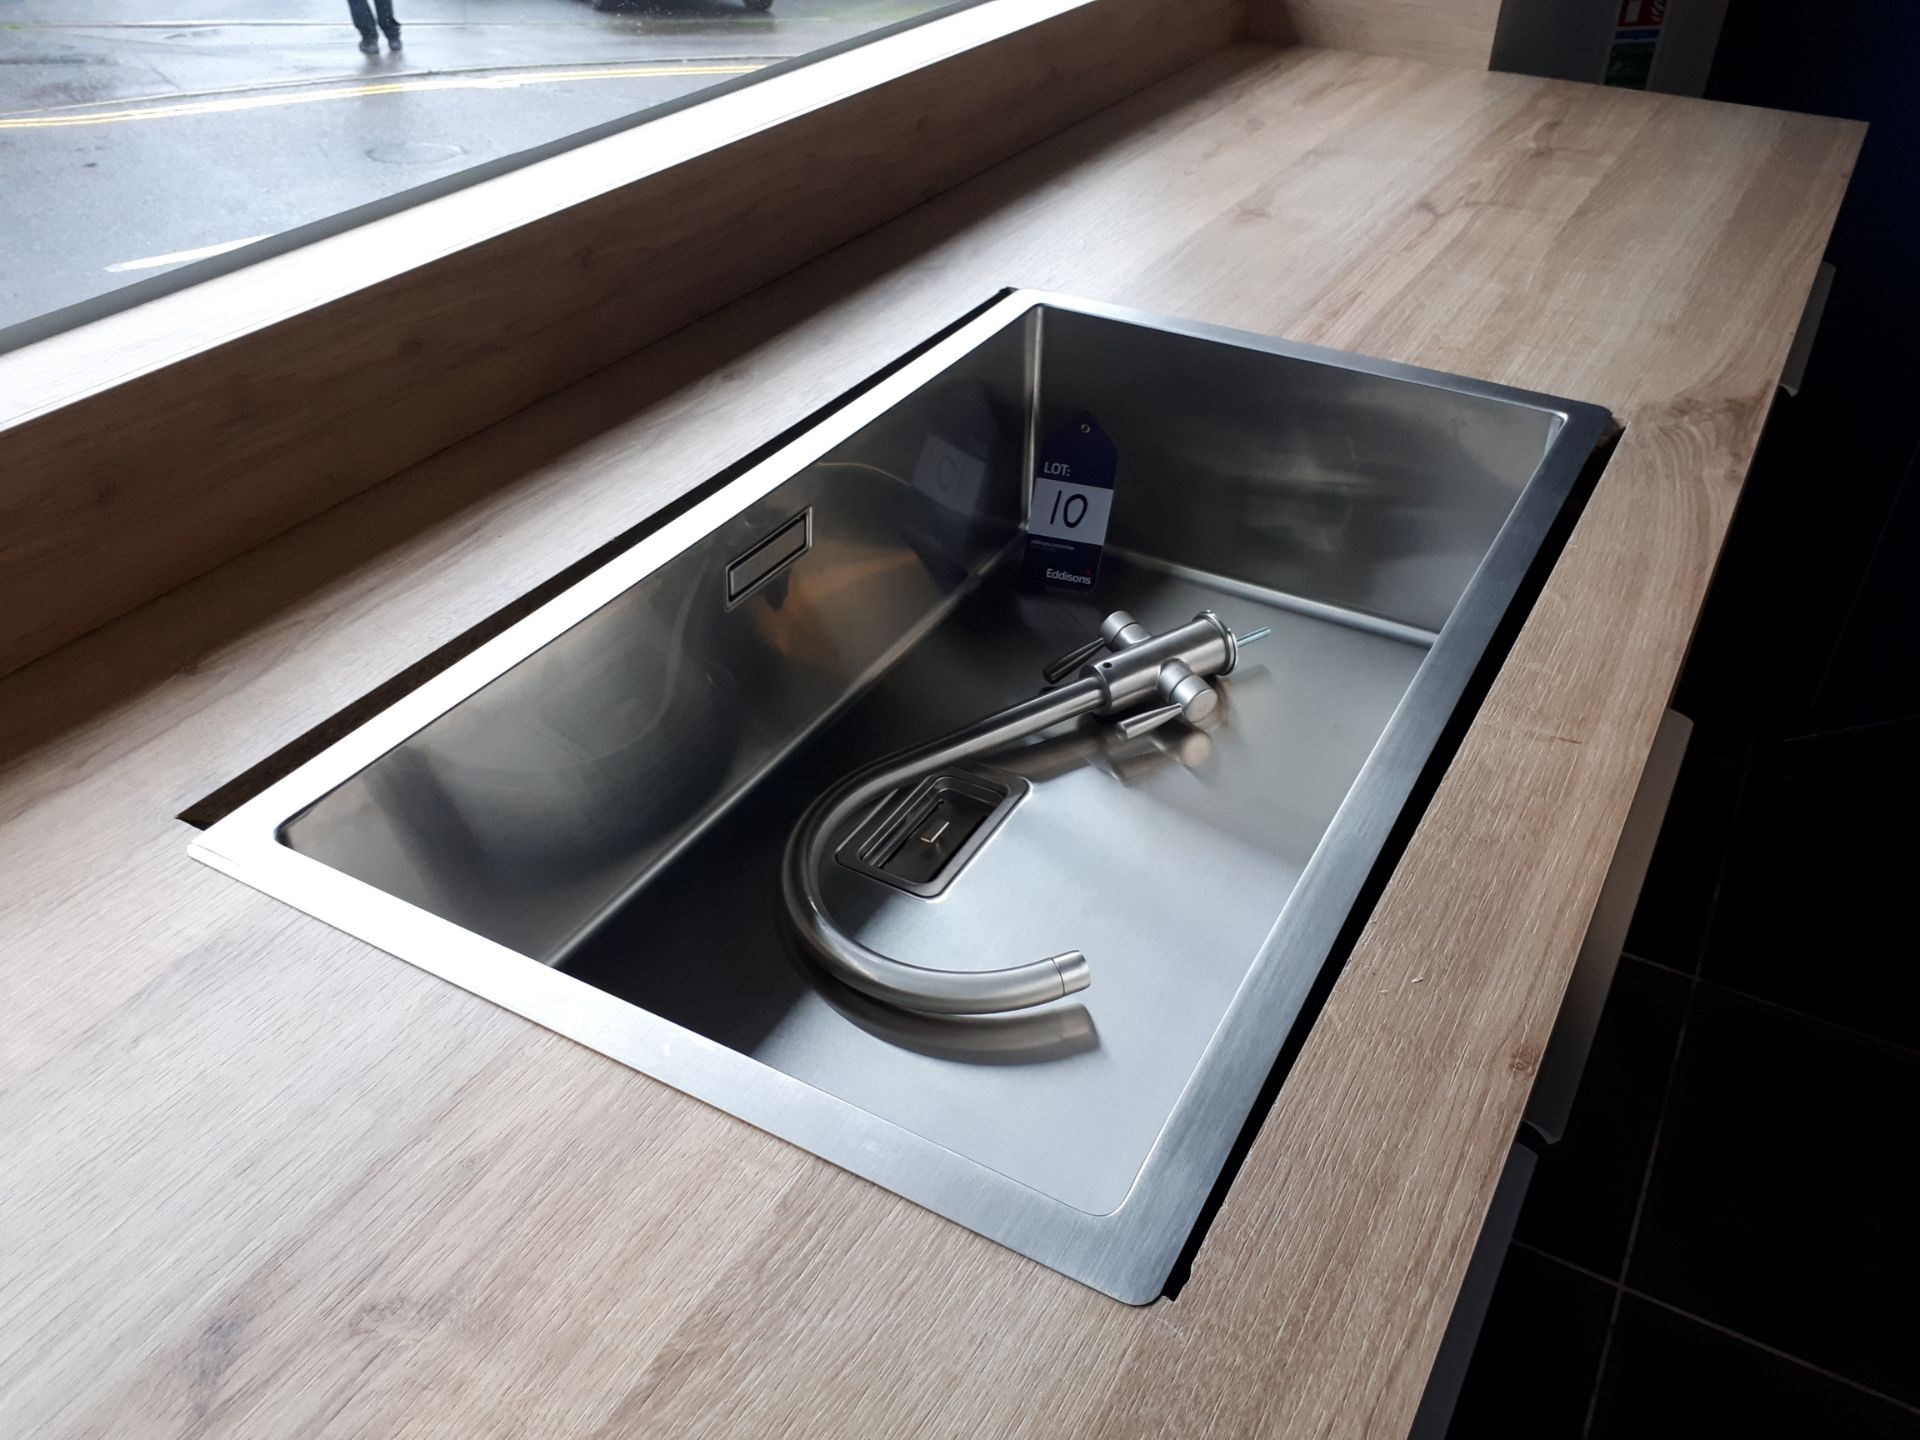 Rodi Stainless Steel Sink with Franke Mixer Tap